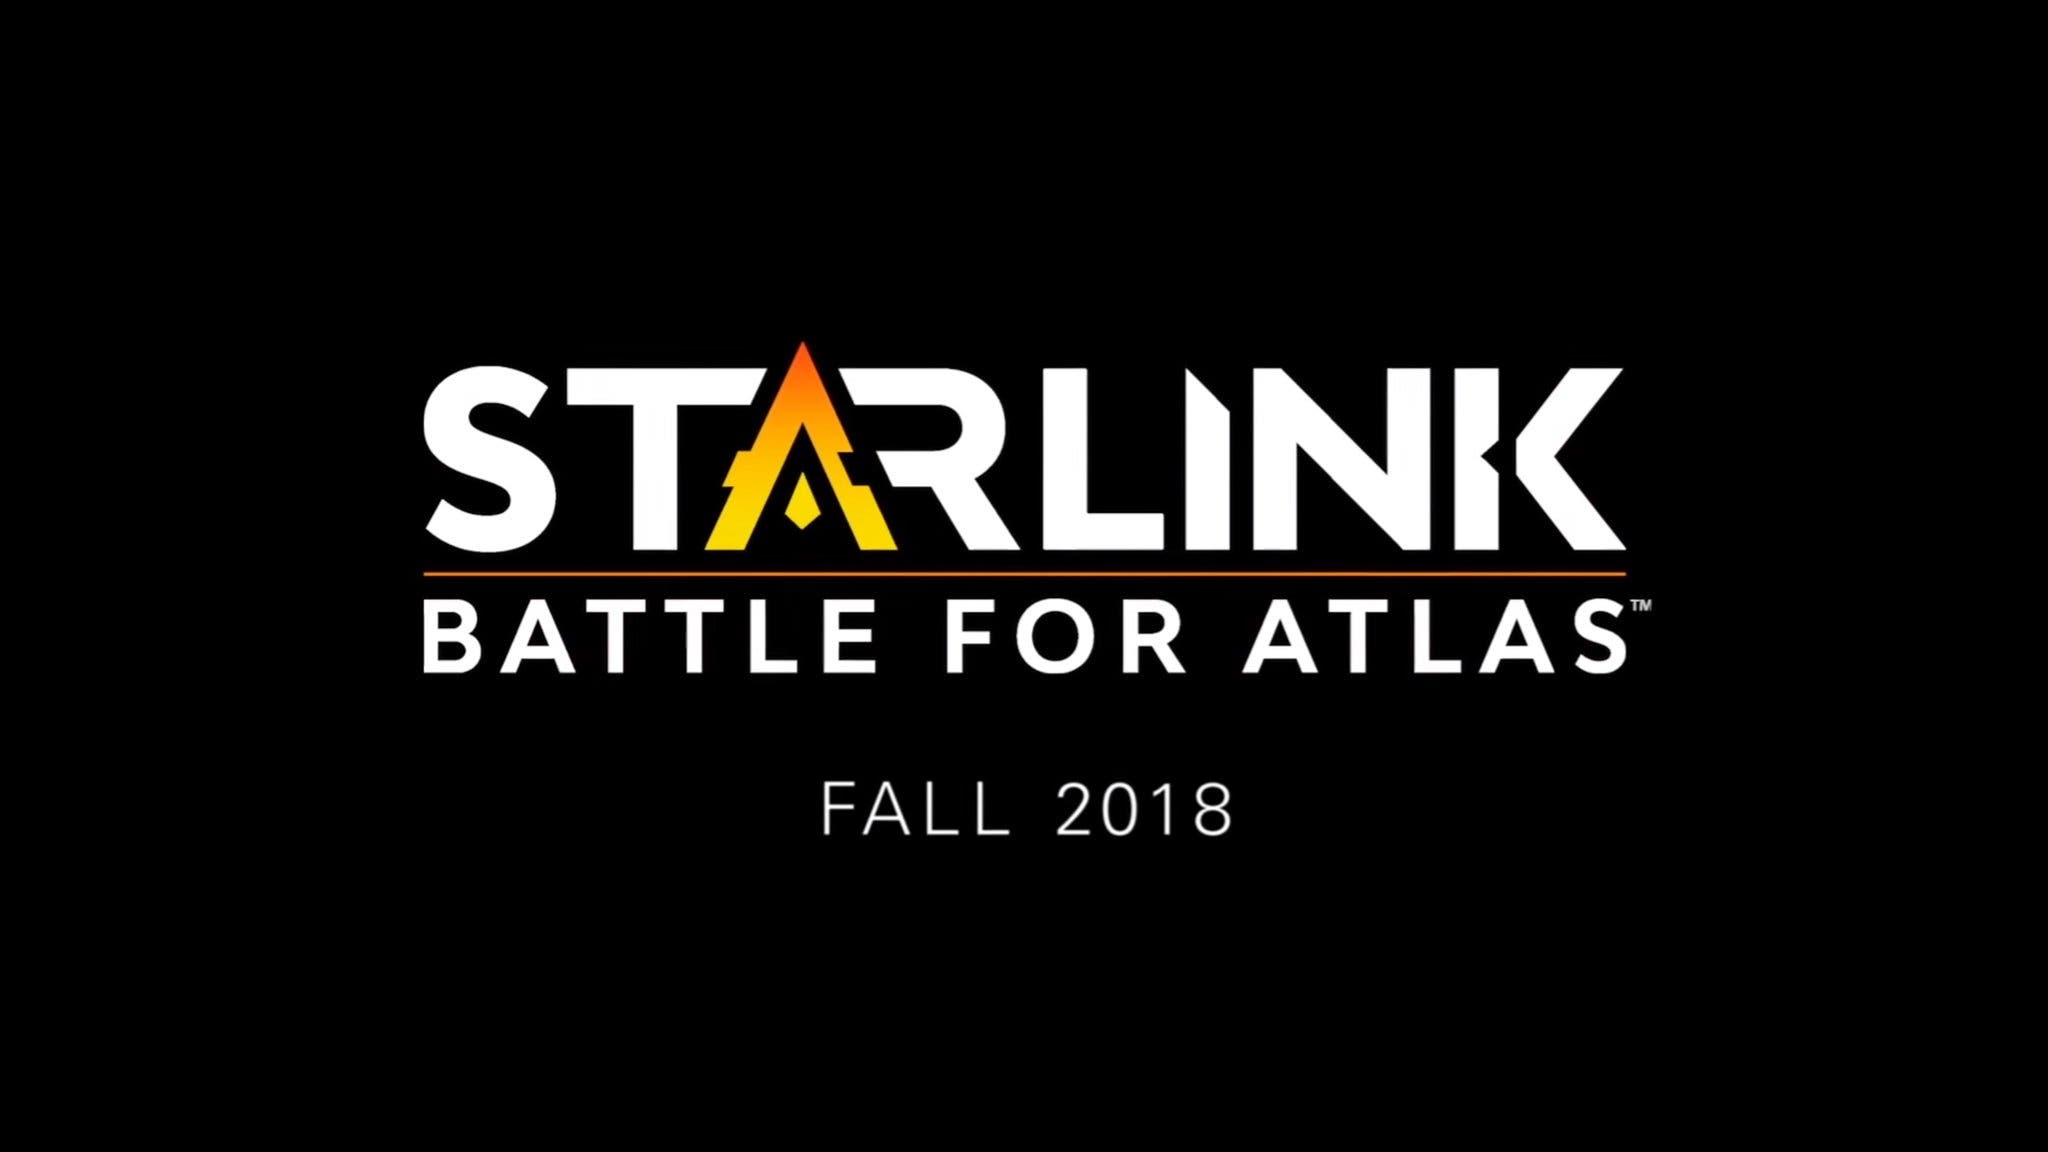 [Act.] Ubisoft confirma Starlink: Battle for Atlas para Switch